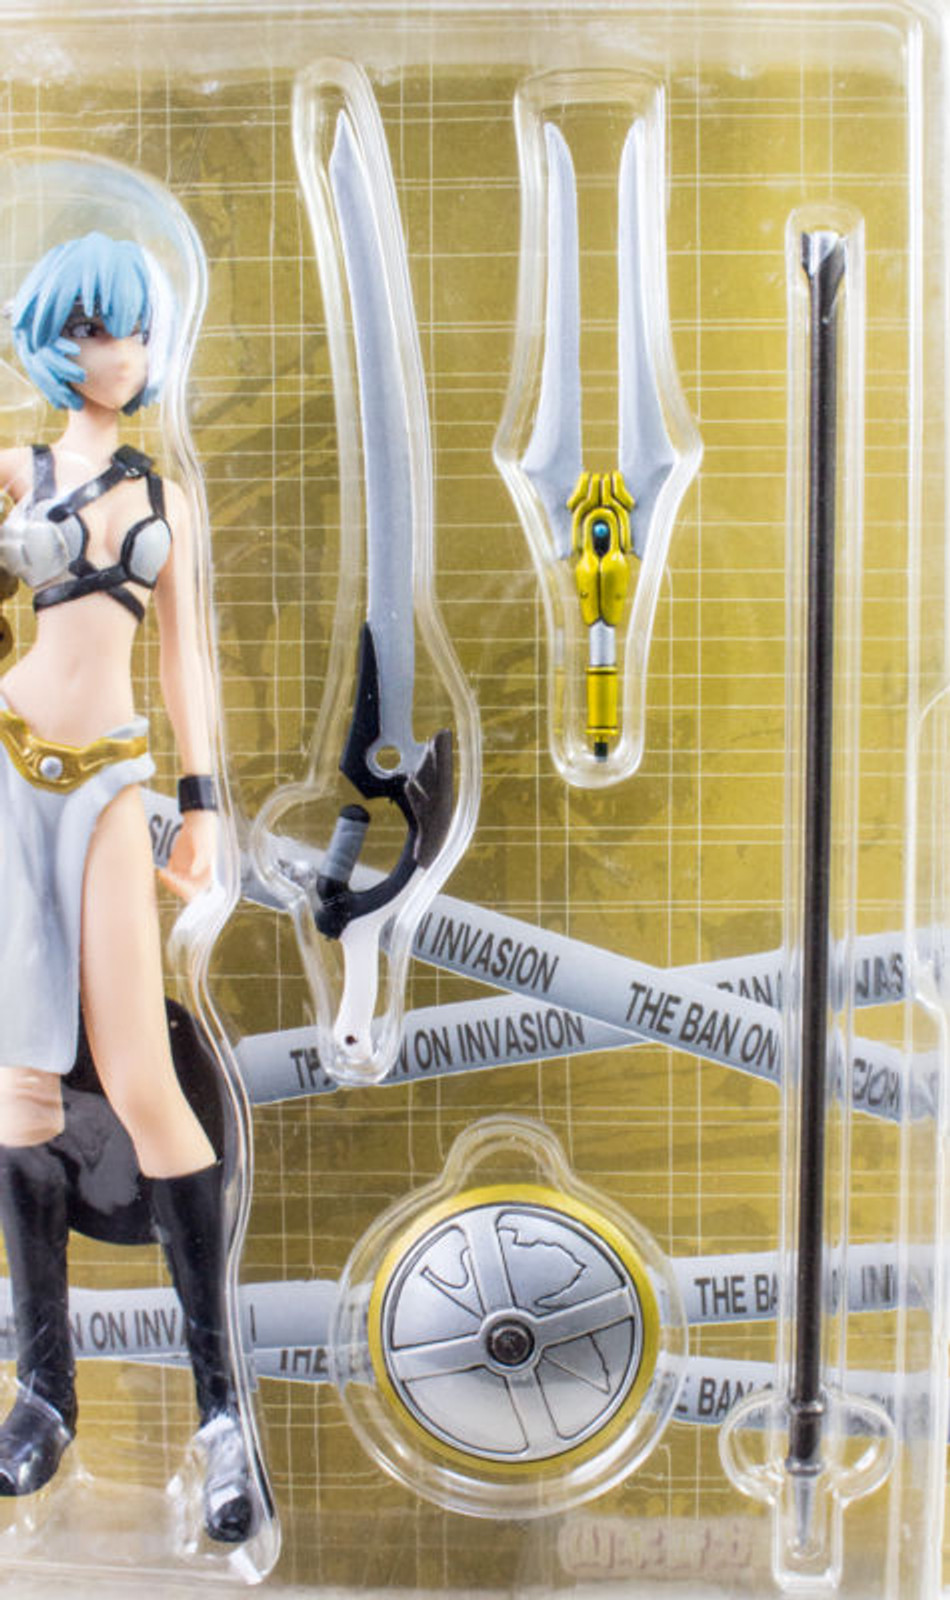 Evangelion Rei Ayanami Figure collection Special Mission #3 Gradiator JAPAN ANIME MANGA